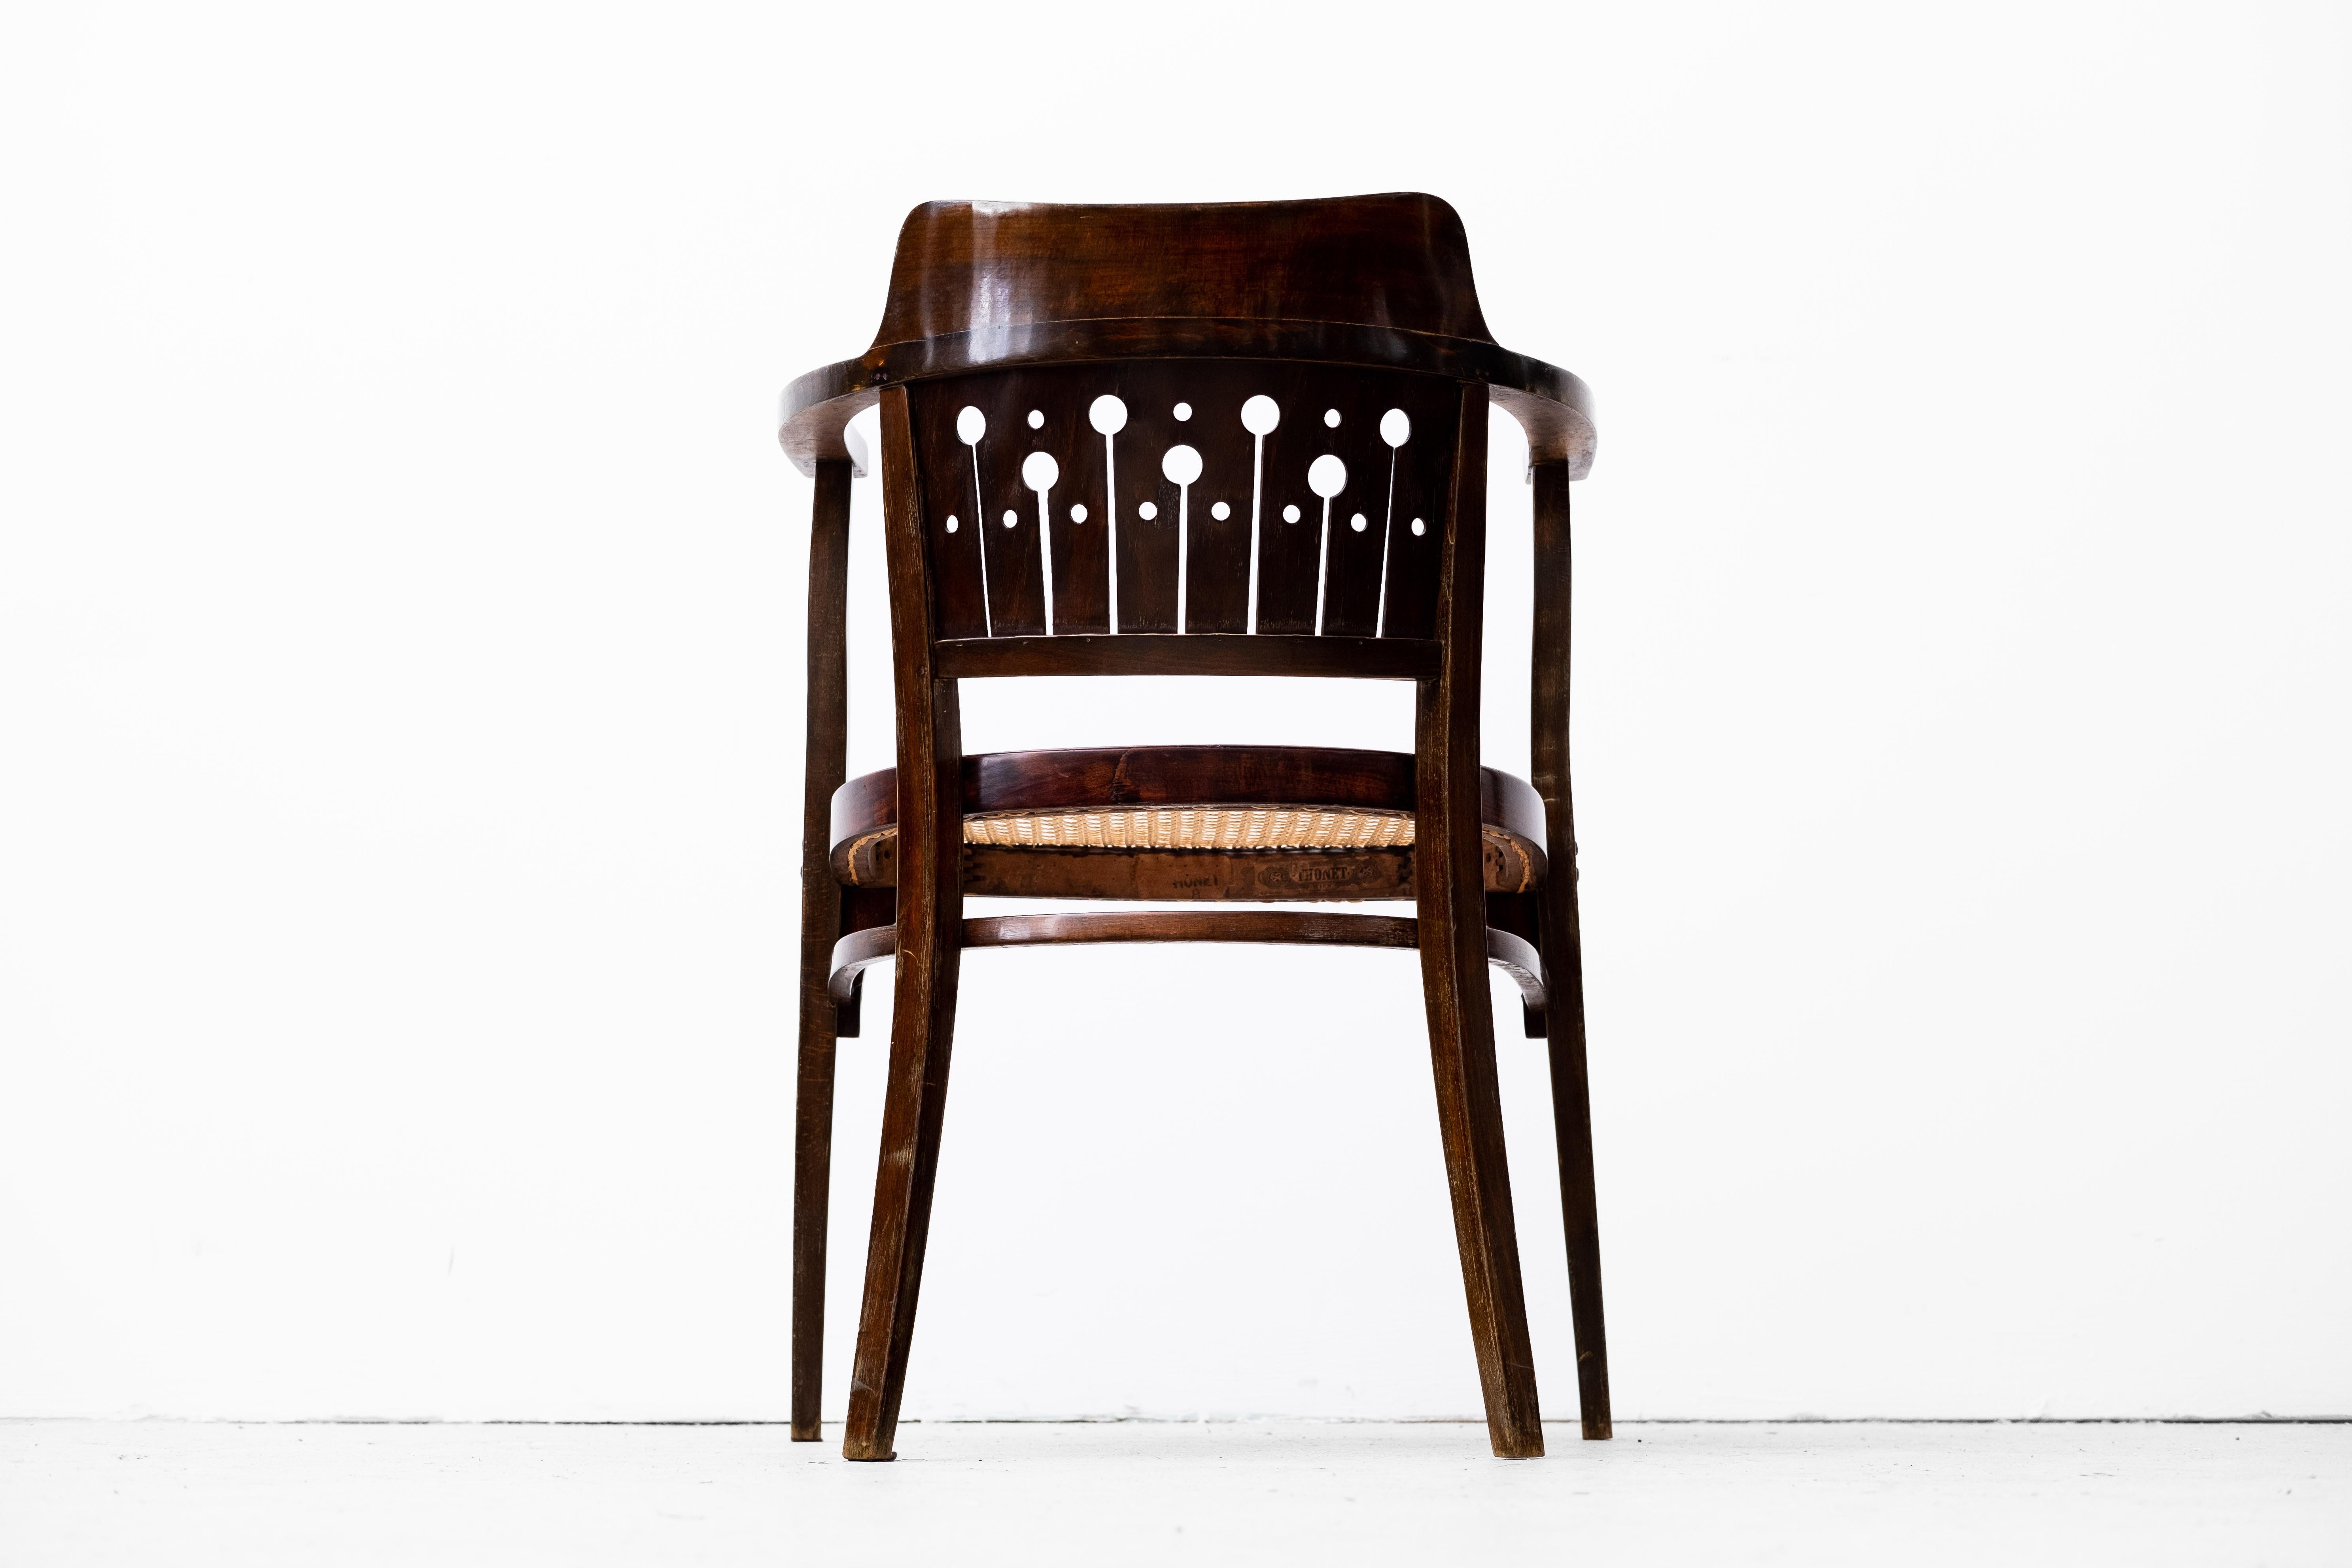 Secession Armchair by Otto Wagner/Gustav Siegel, Thonet Brothers (Vienna, 1905) For Sale 9